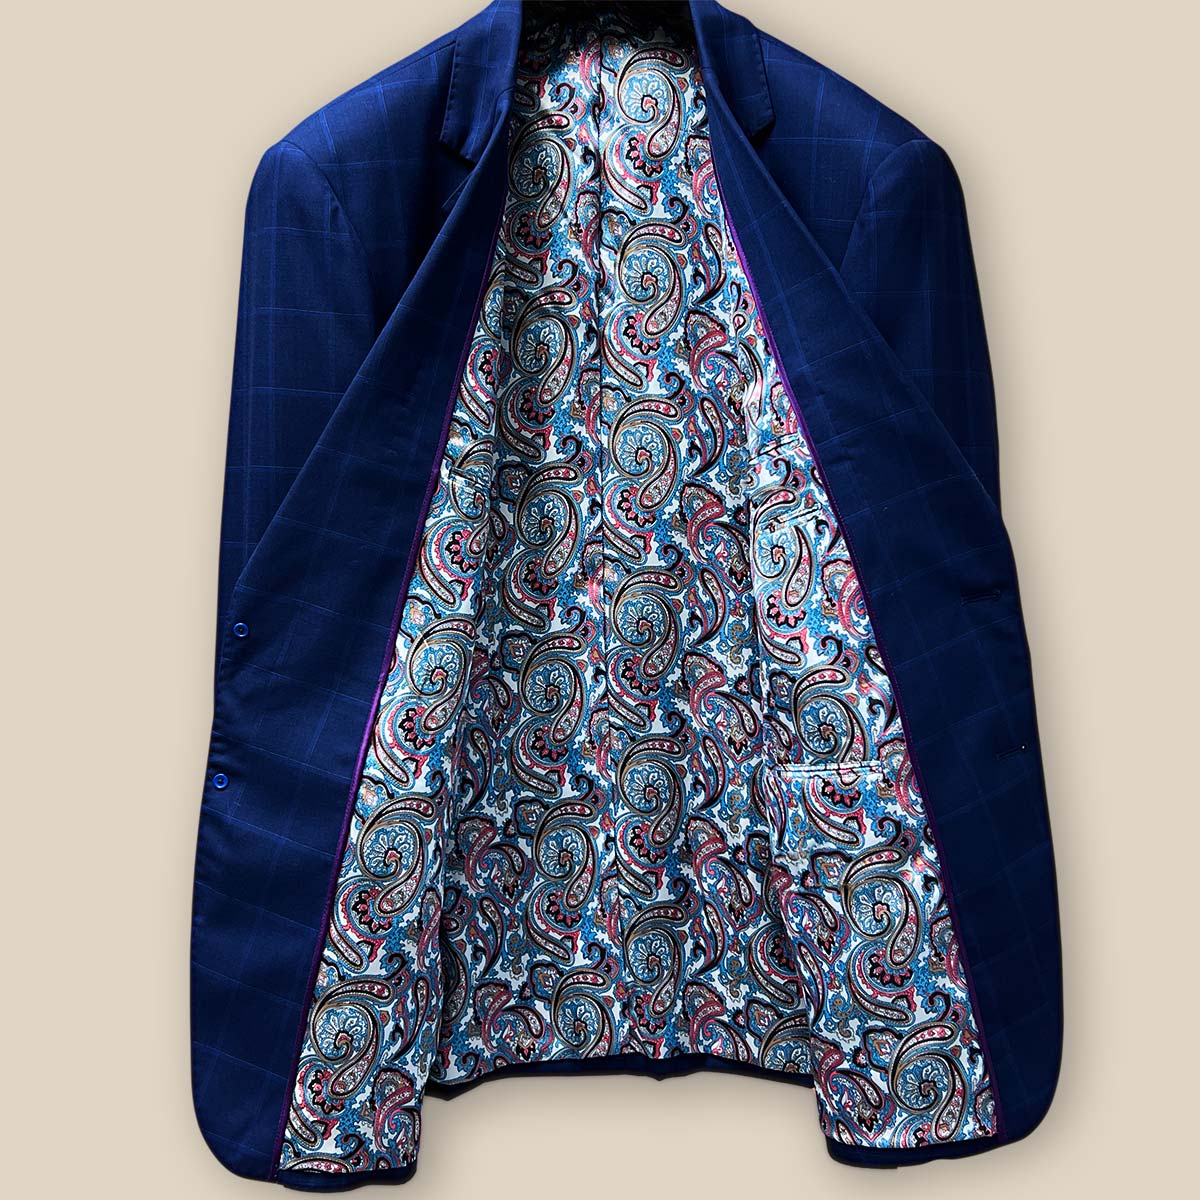 Full view of the jacket's interior lining displaying the vibrant multi-color fancy paisley pattern.